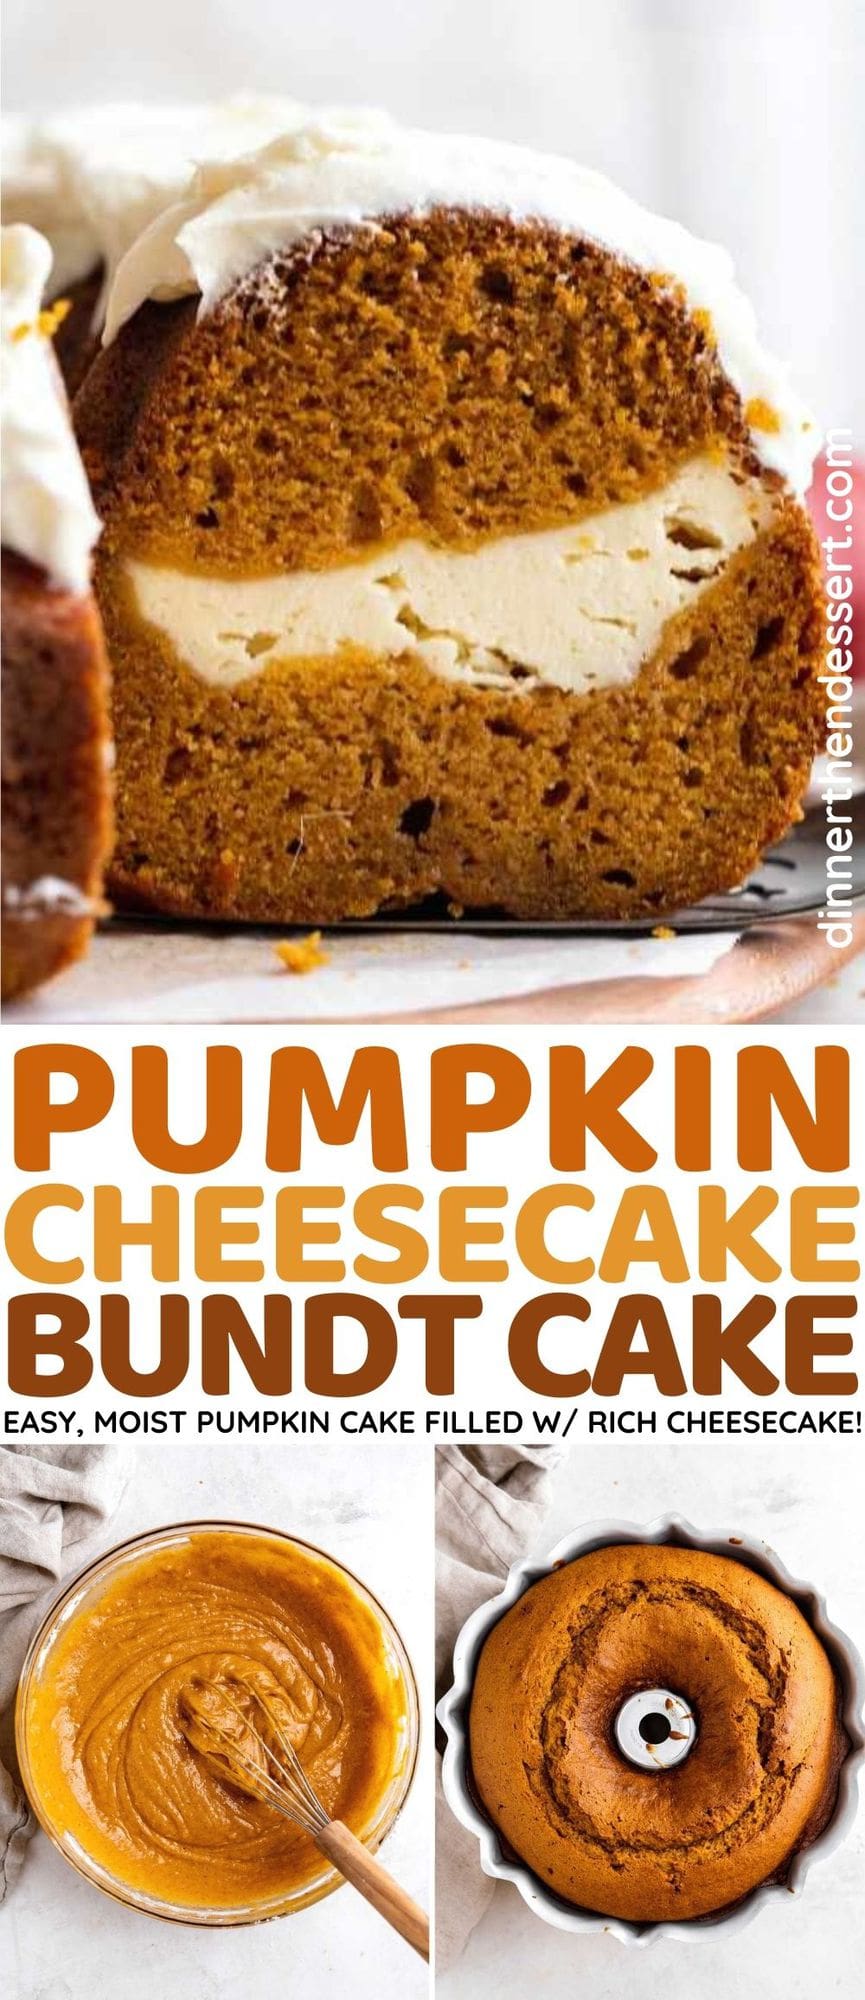 Pumpkin Cheesecake Bundt Cake on cake plate with slice removed and preparation collage